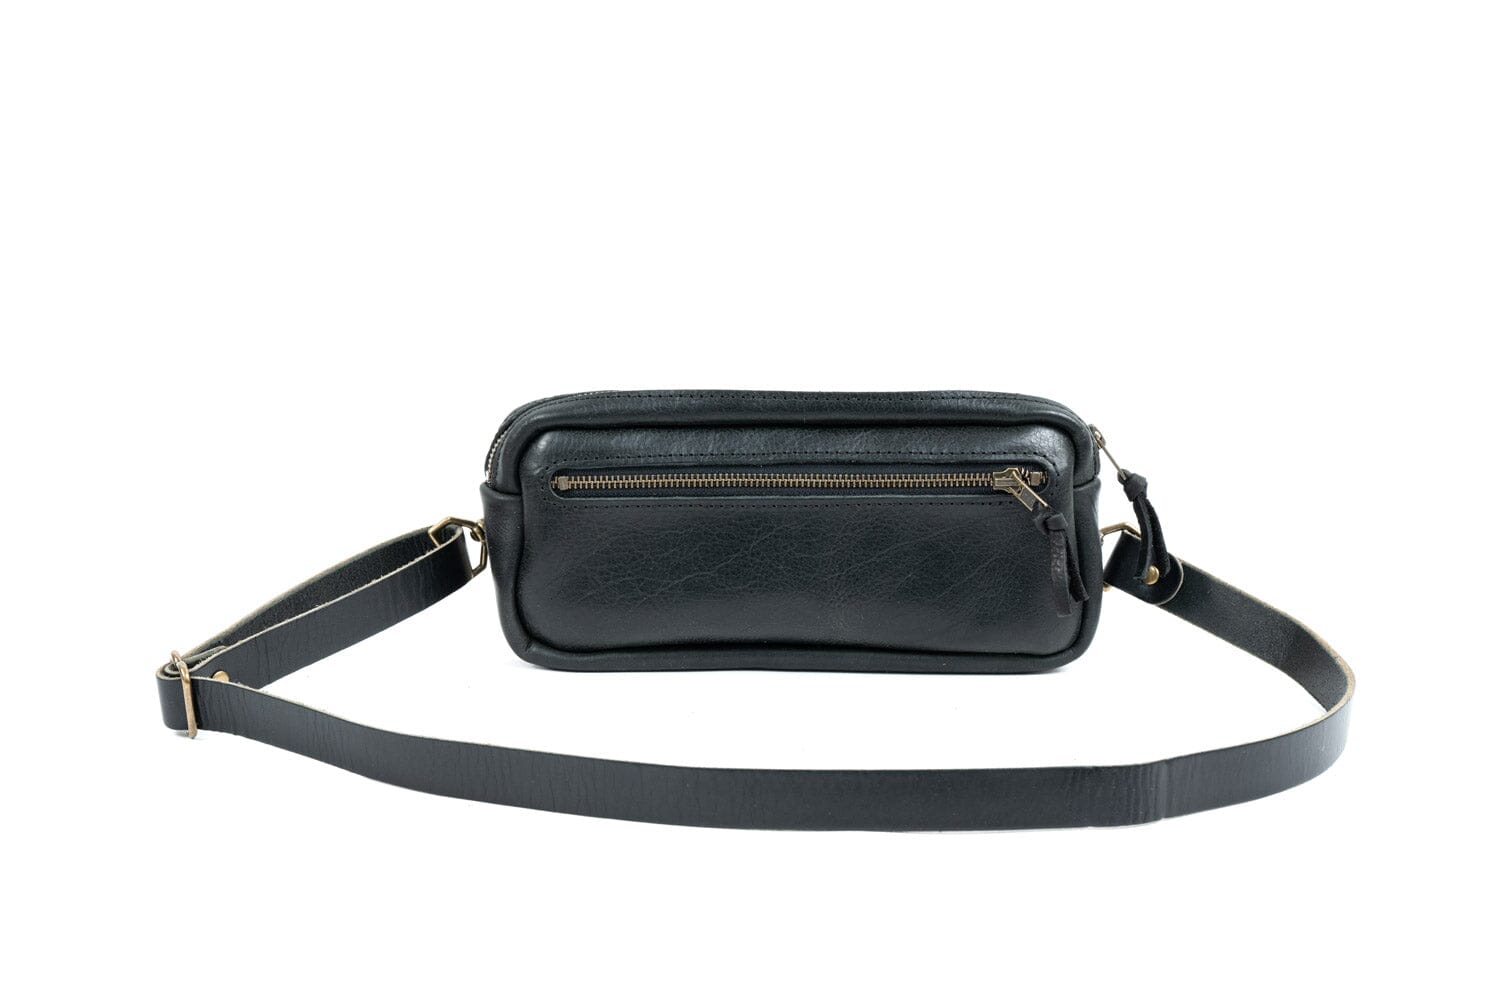 LEATHER FANNY PACK / LEATHER WAIST BAG - DELUXE - BLACK BISON